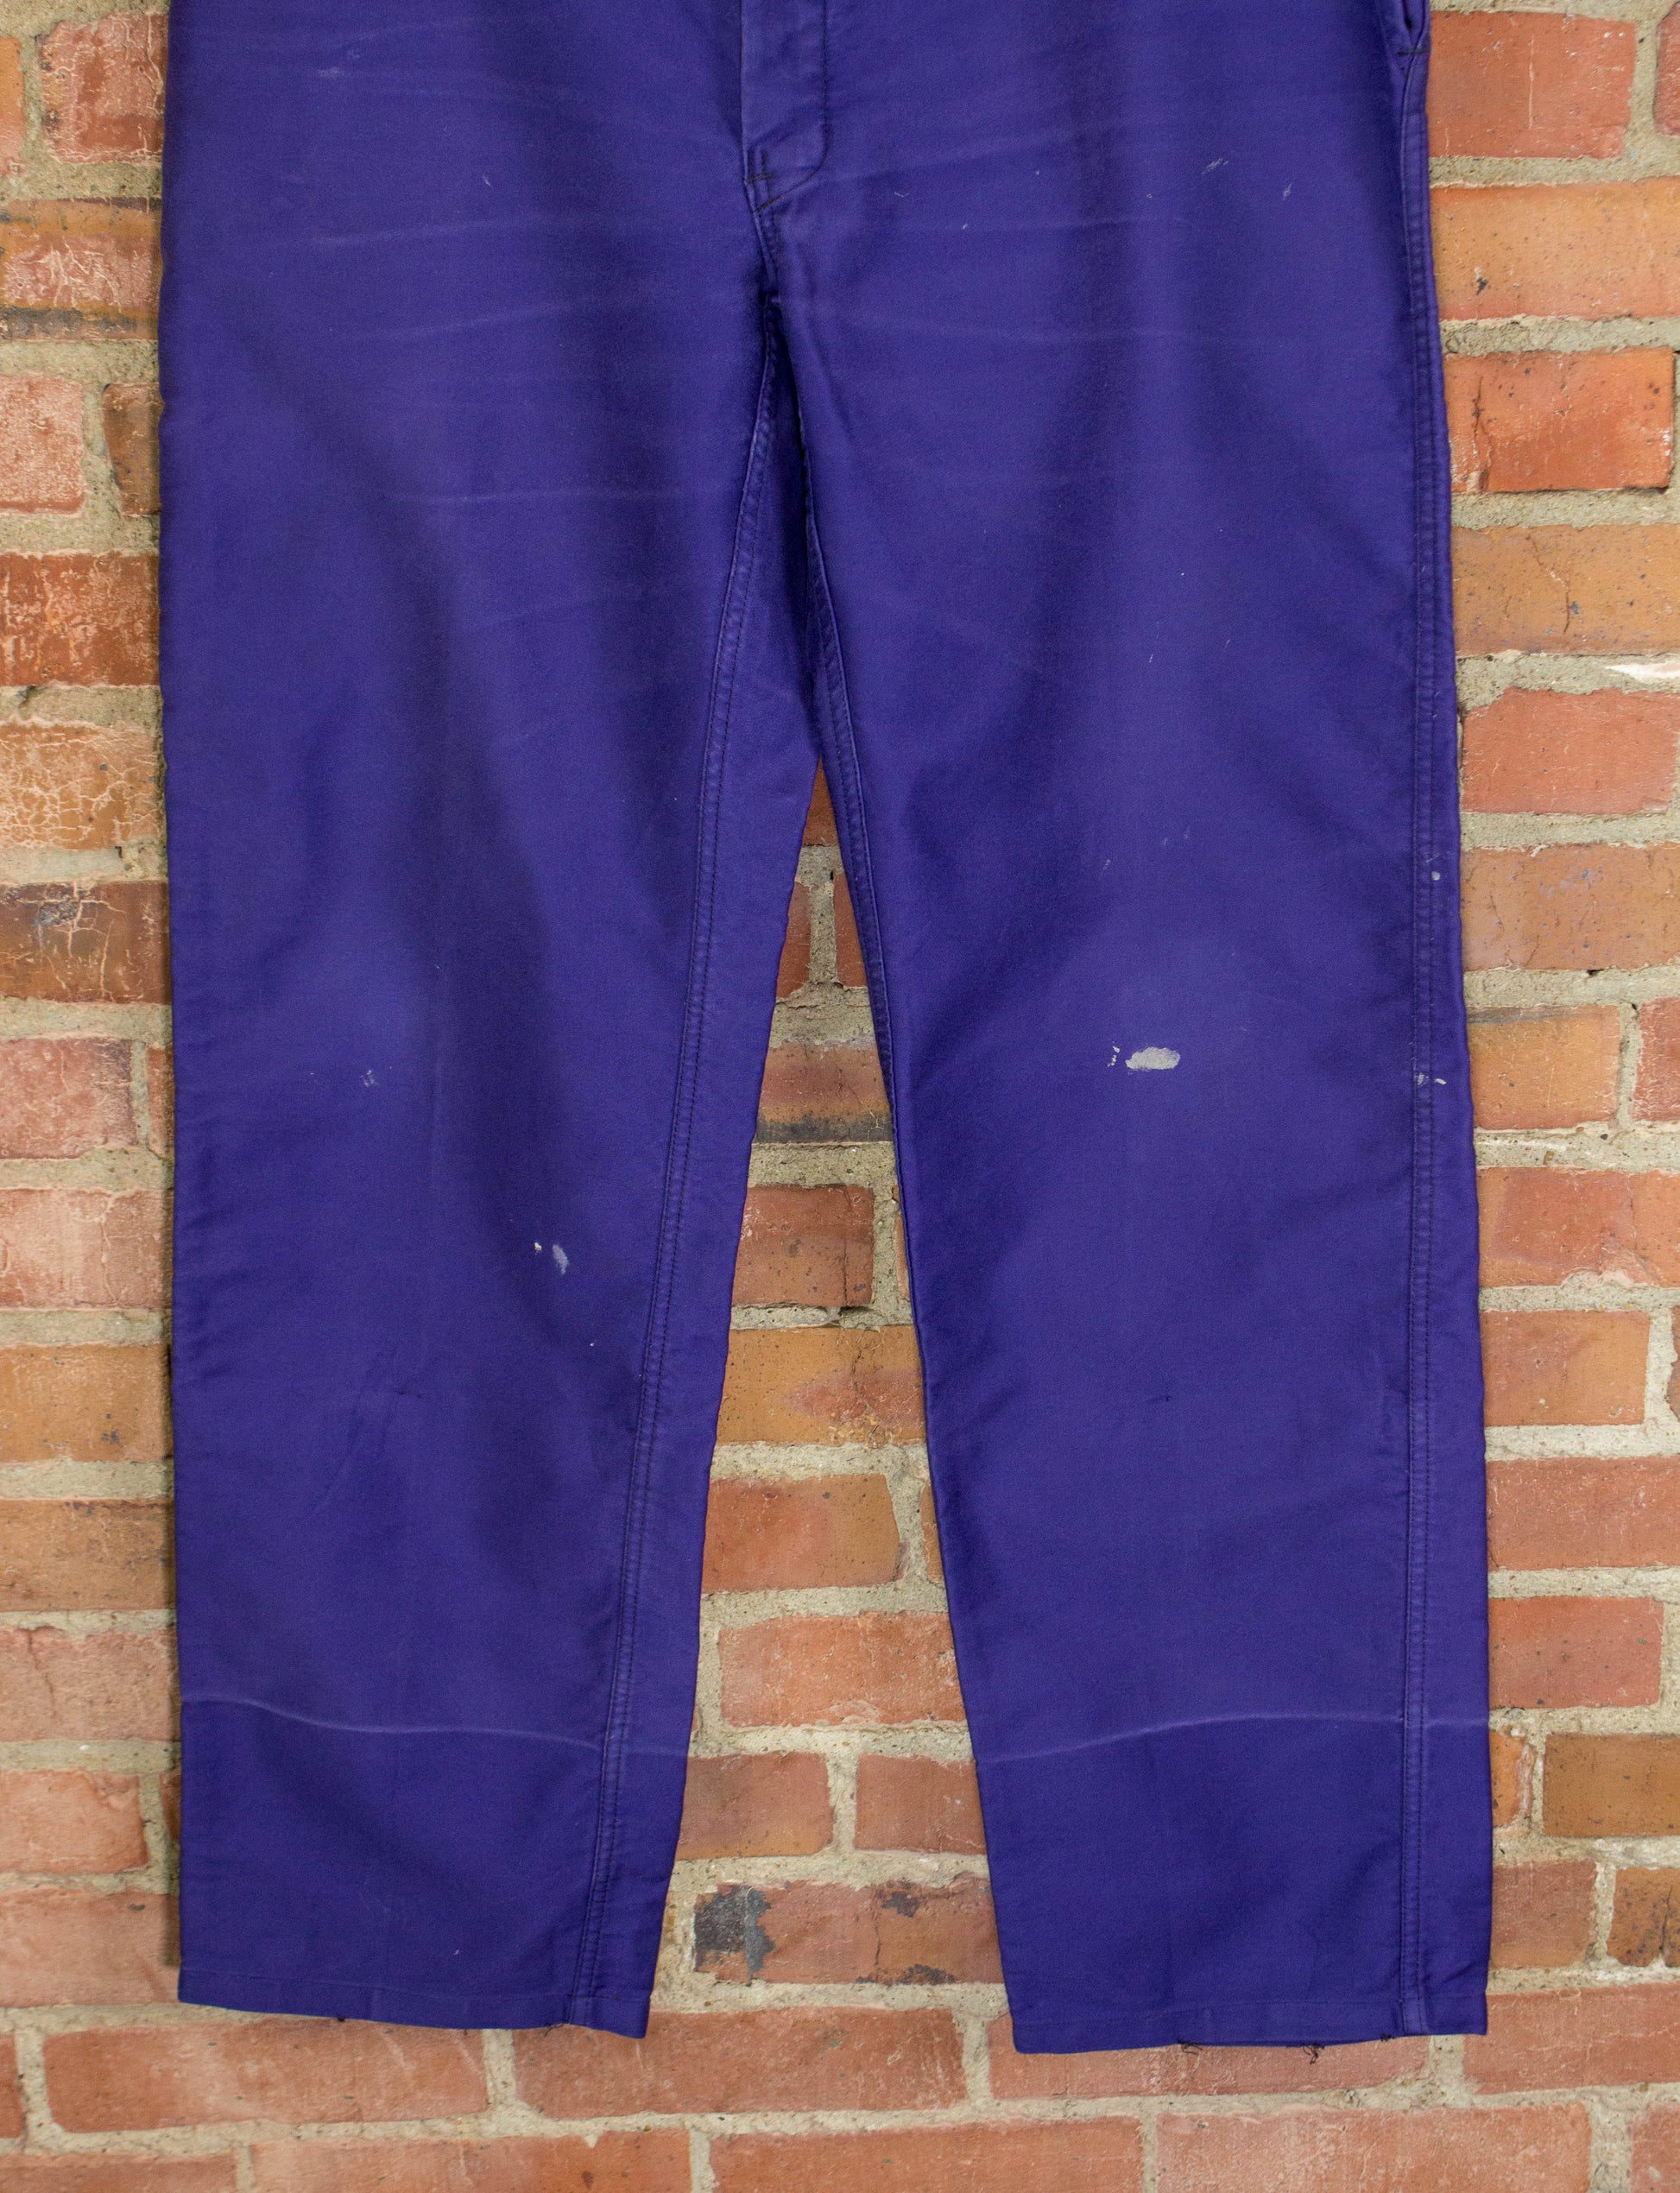 Vintage Adolphe Lafont Faded Purple Moleskin French Work Pants Size 36x32